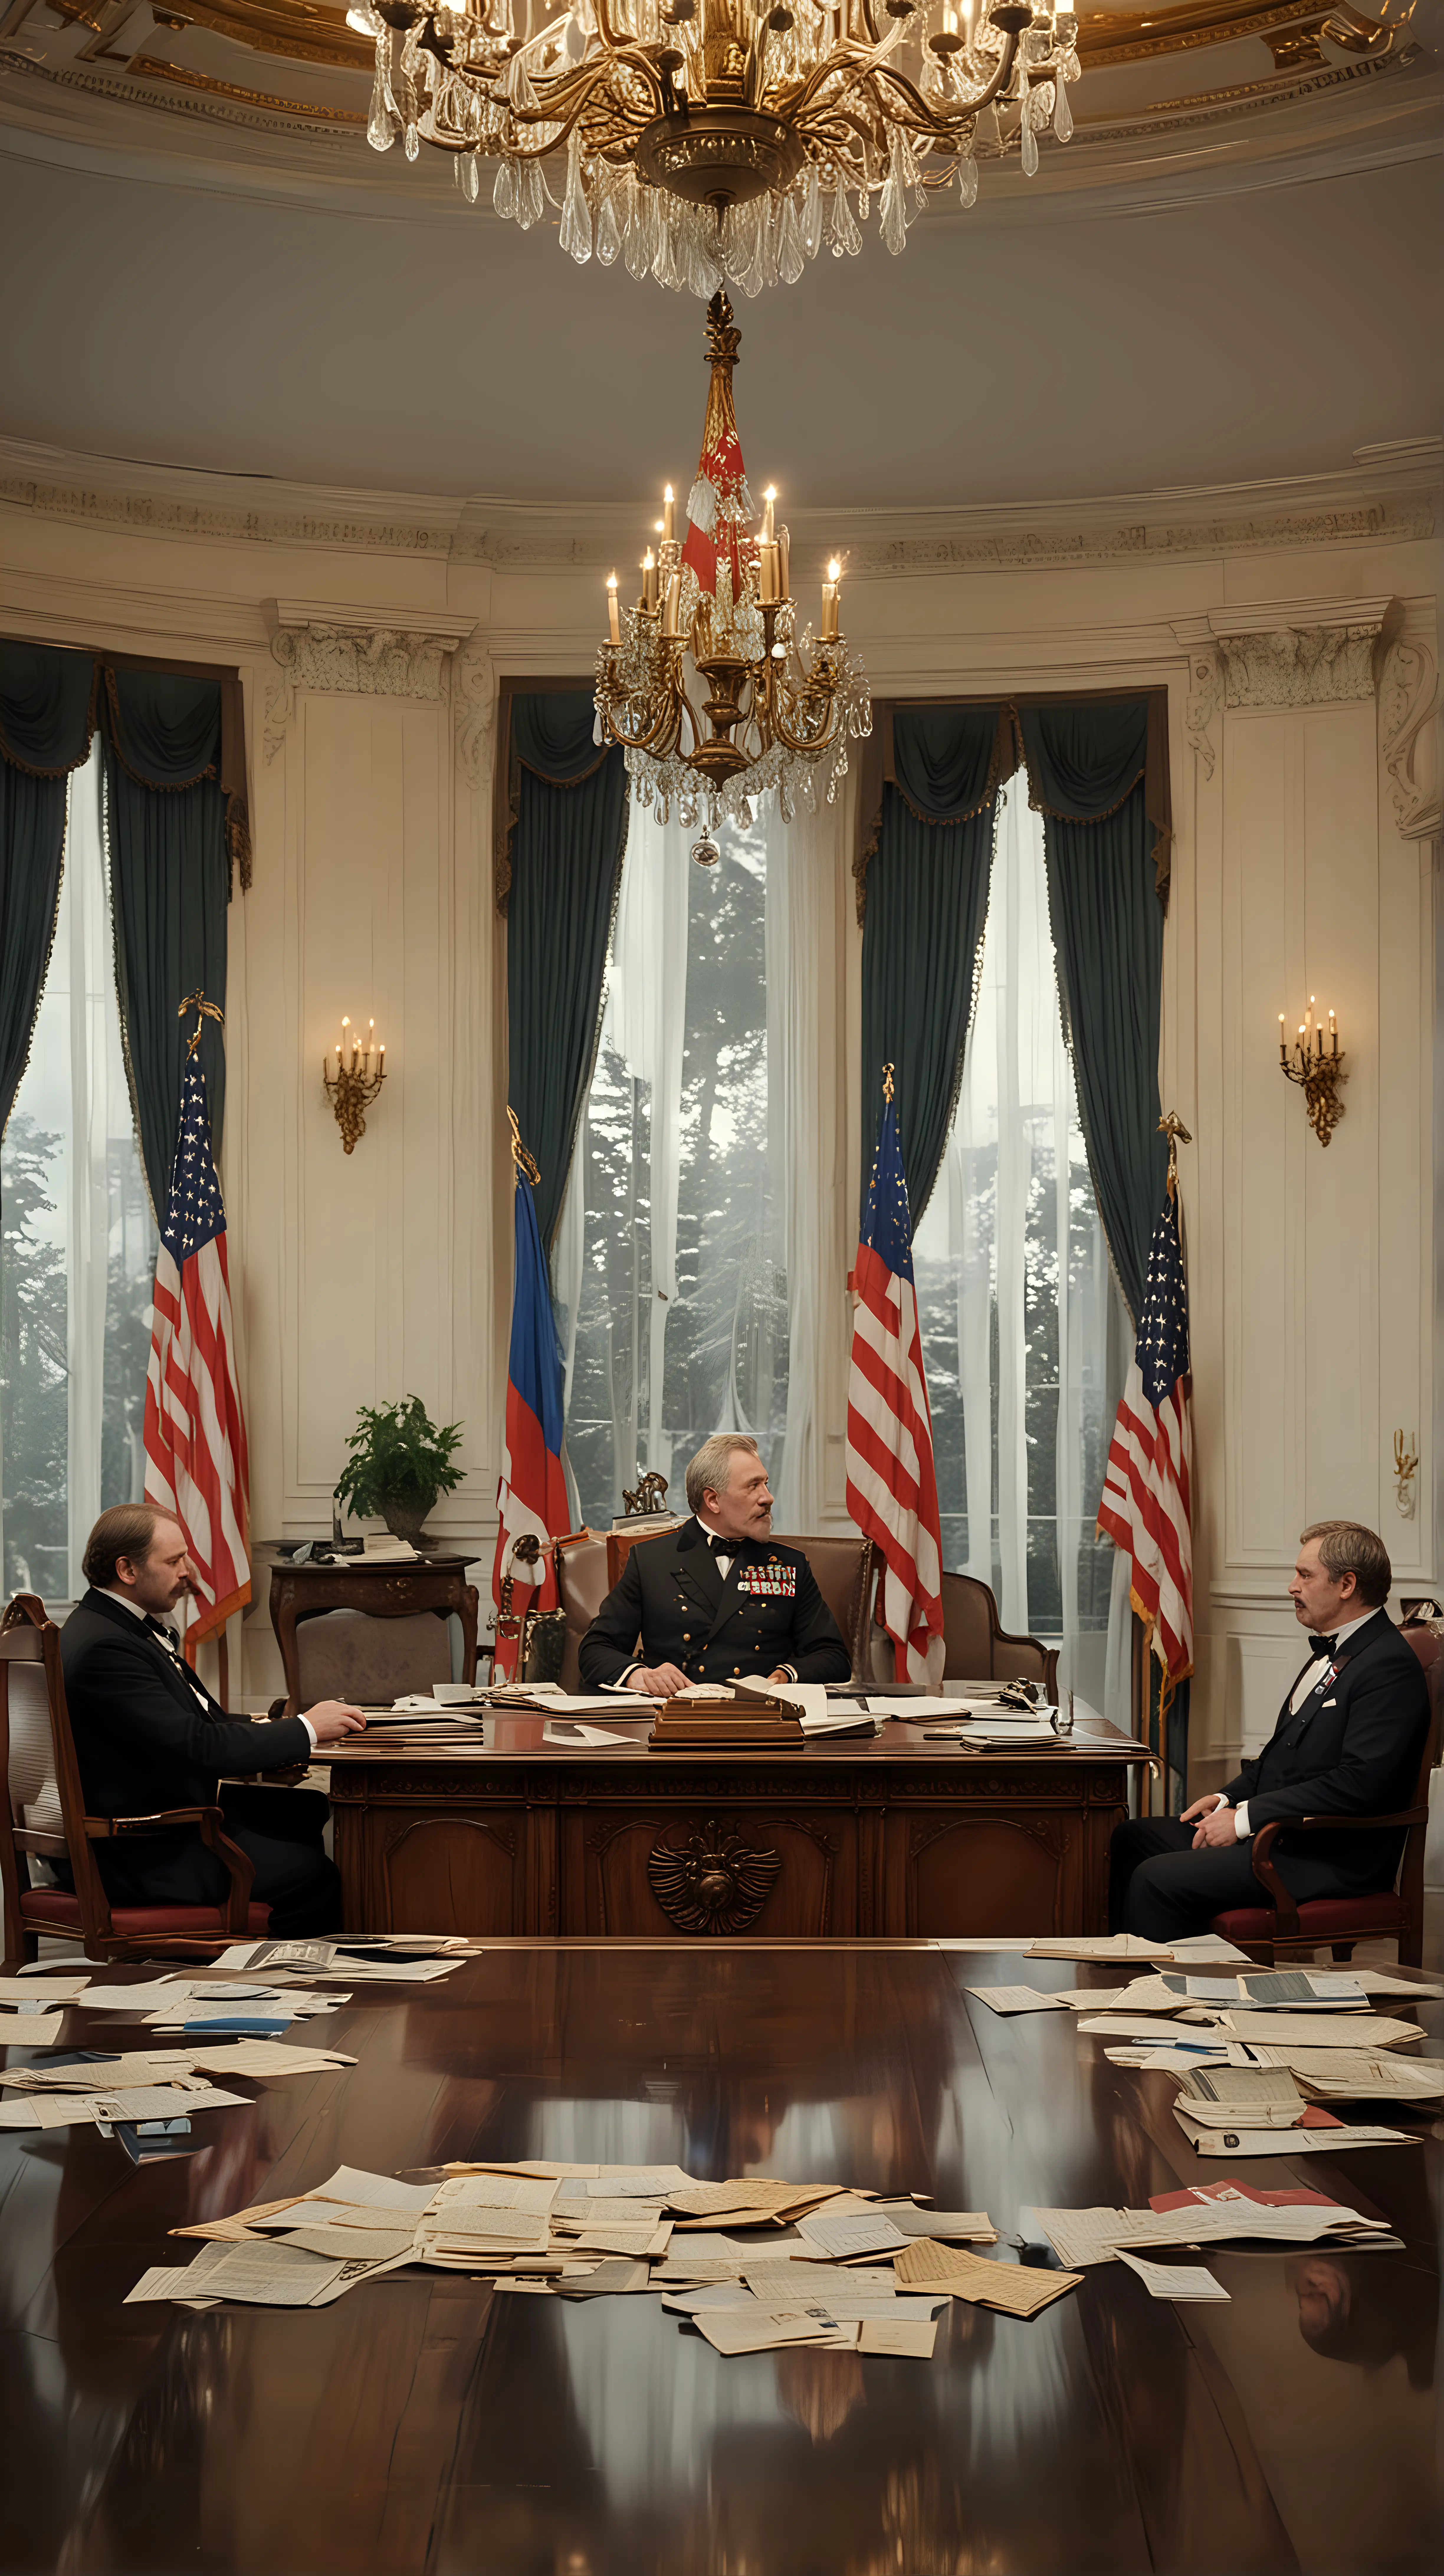 Design a captivating cover image for a video titled 'The Alaska Purchase: A Historical Turning Point'. The image should feature a dramatic depiction of the negotiation scene between representatives of Russia and the United States. Show Tsar Alexander II and Secretary of State William Seward facing each other across a table, surrounded by diplomats and officials. The background should include iconic elements such as the Russian flags and American flags, a map of Alaska, and historical documents. Use lighting and composition to convey the gravity and significance of this pivotal moment in history. Hyper realistic